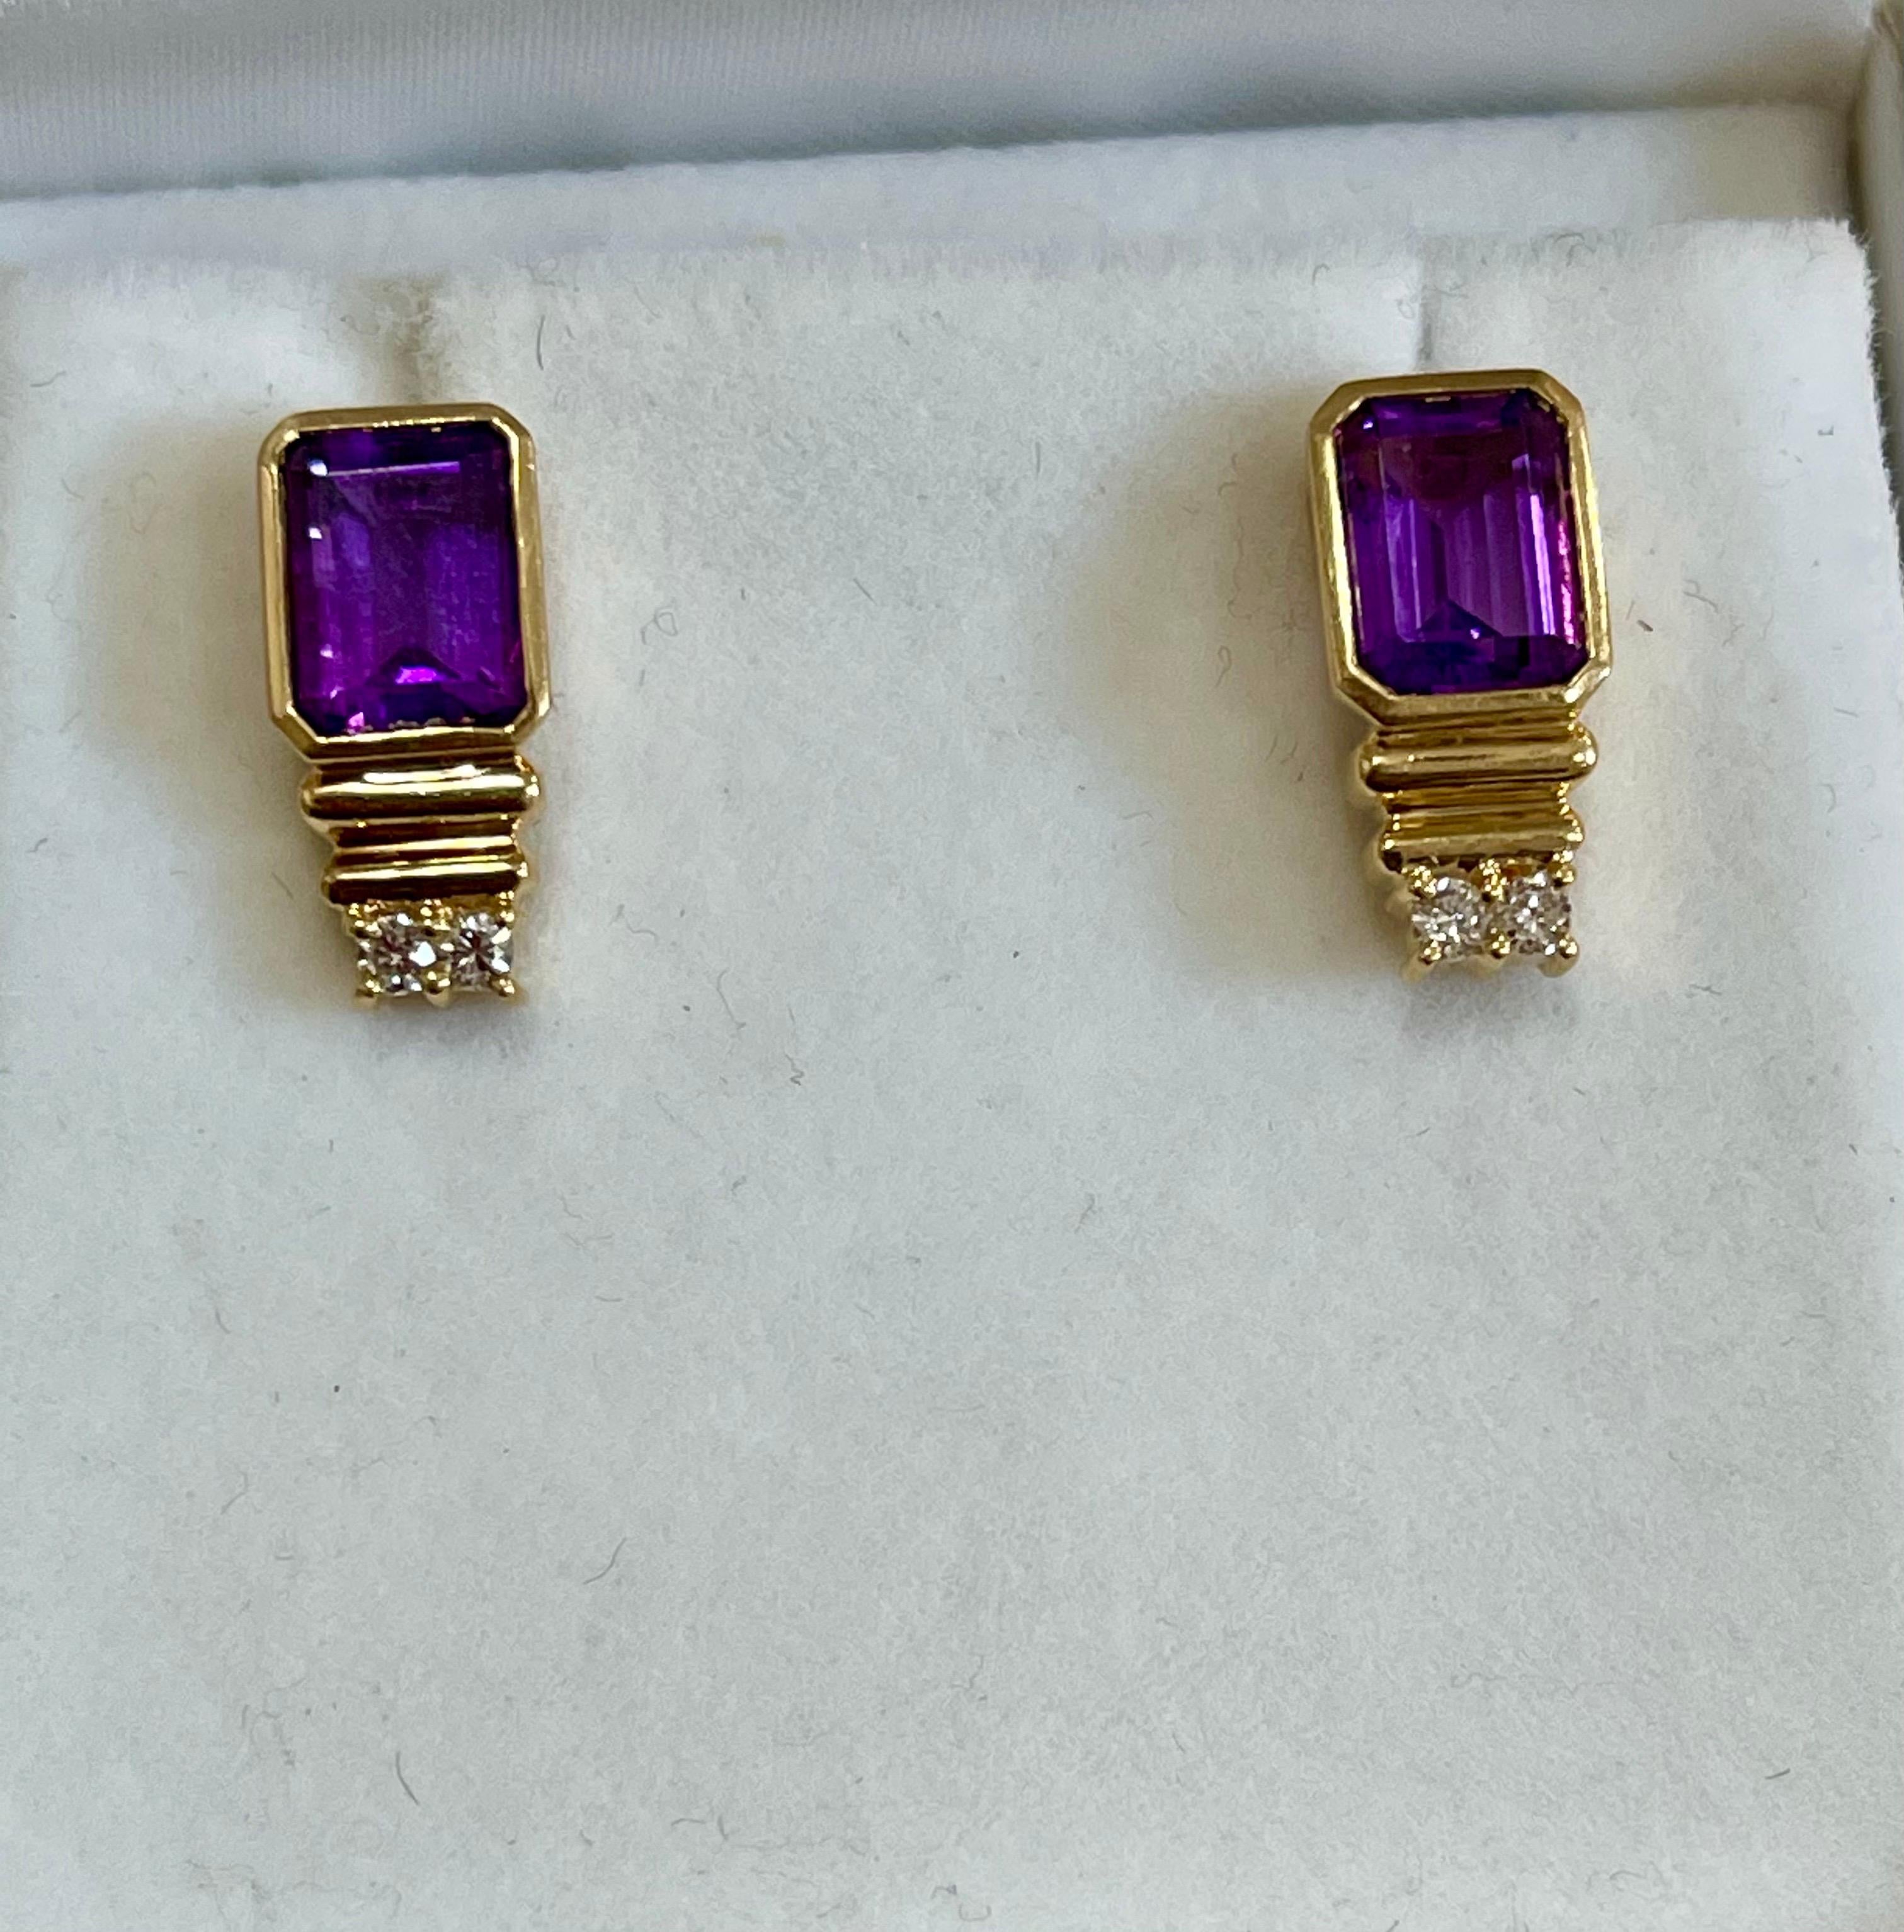 3 Carat Amethyst and Diamond 14 Karat Yellow Gold Earrings, Stud Post Earring In Excellent Condition For Sale In New York, NY